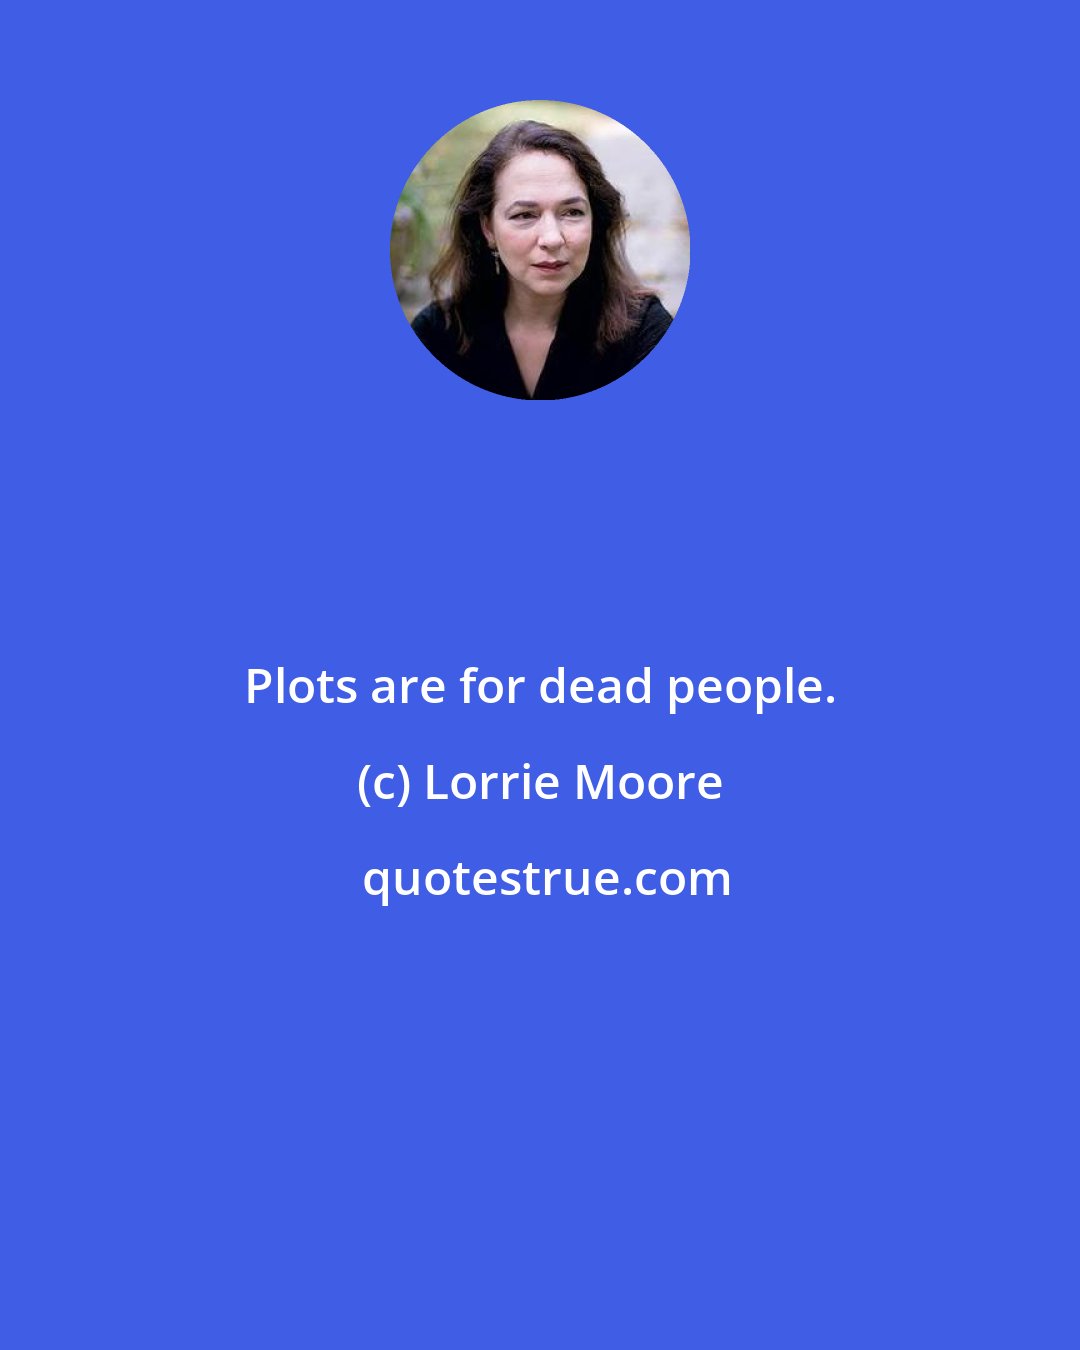 Lorrie Moore: Plots are for dead people.